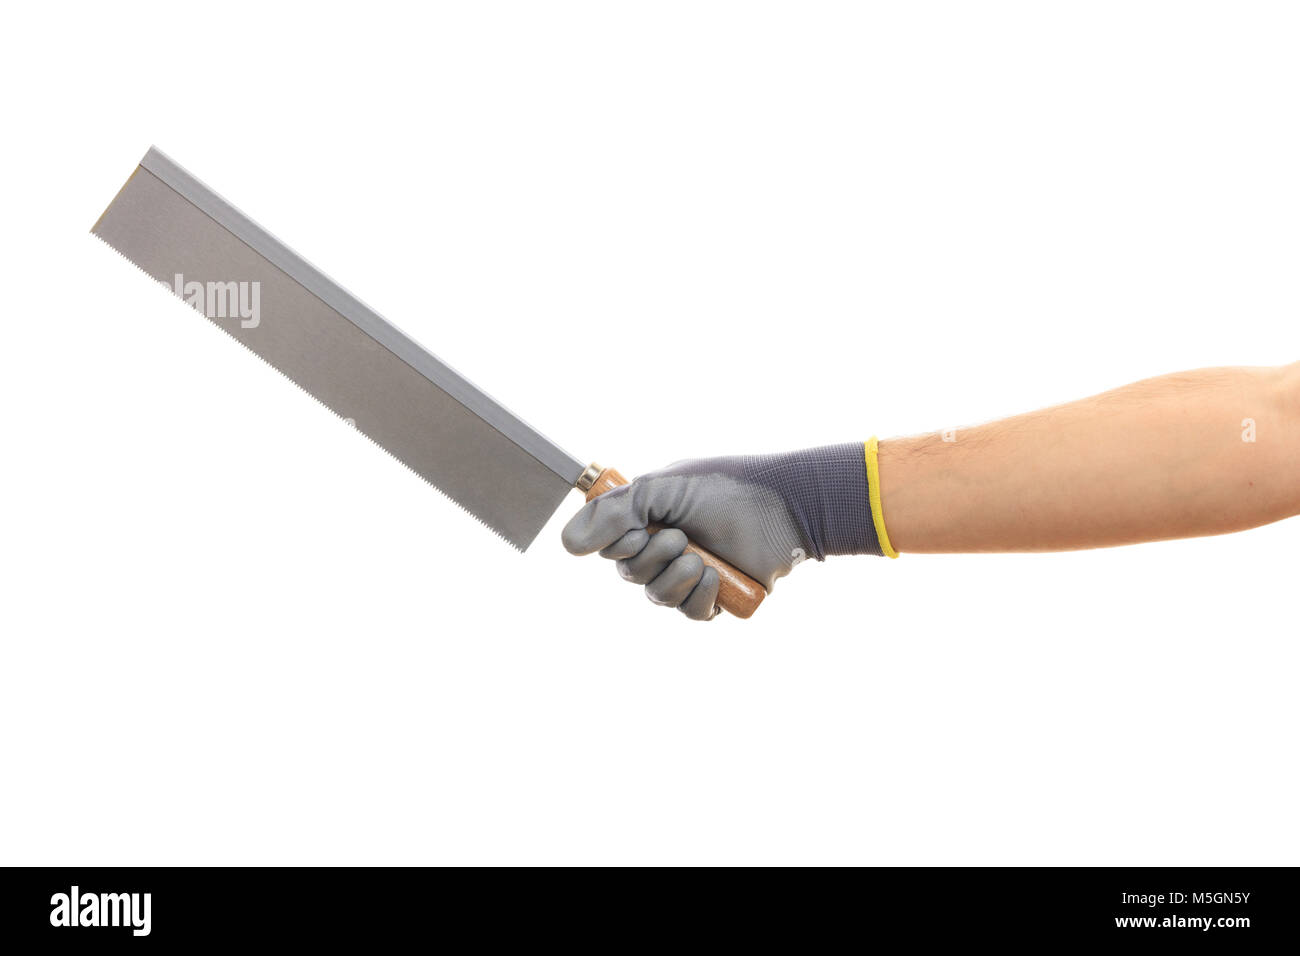 Hand holding a saw with wooden grip on white background Stock Photo